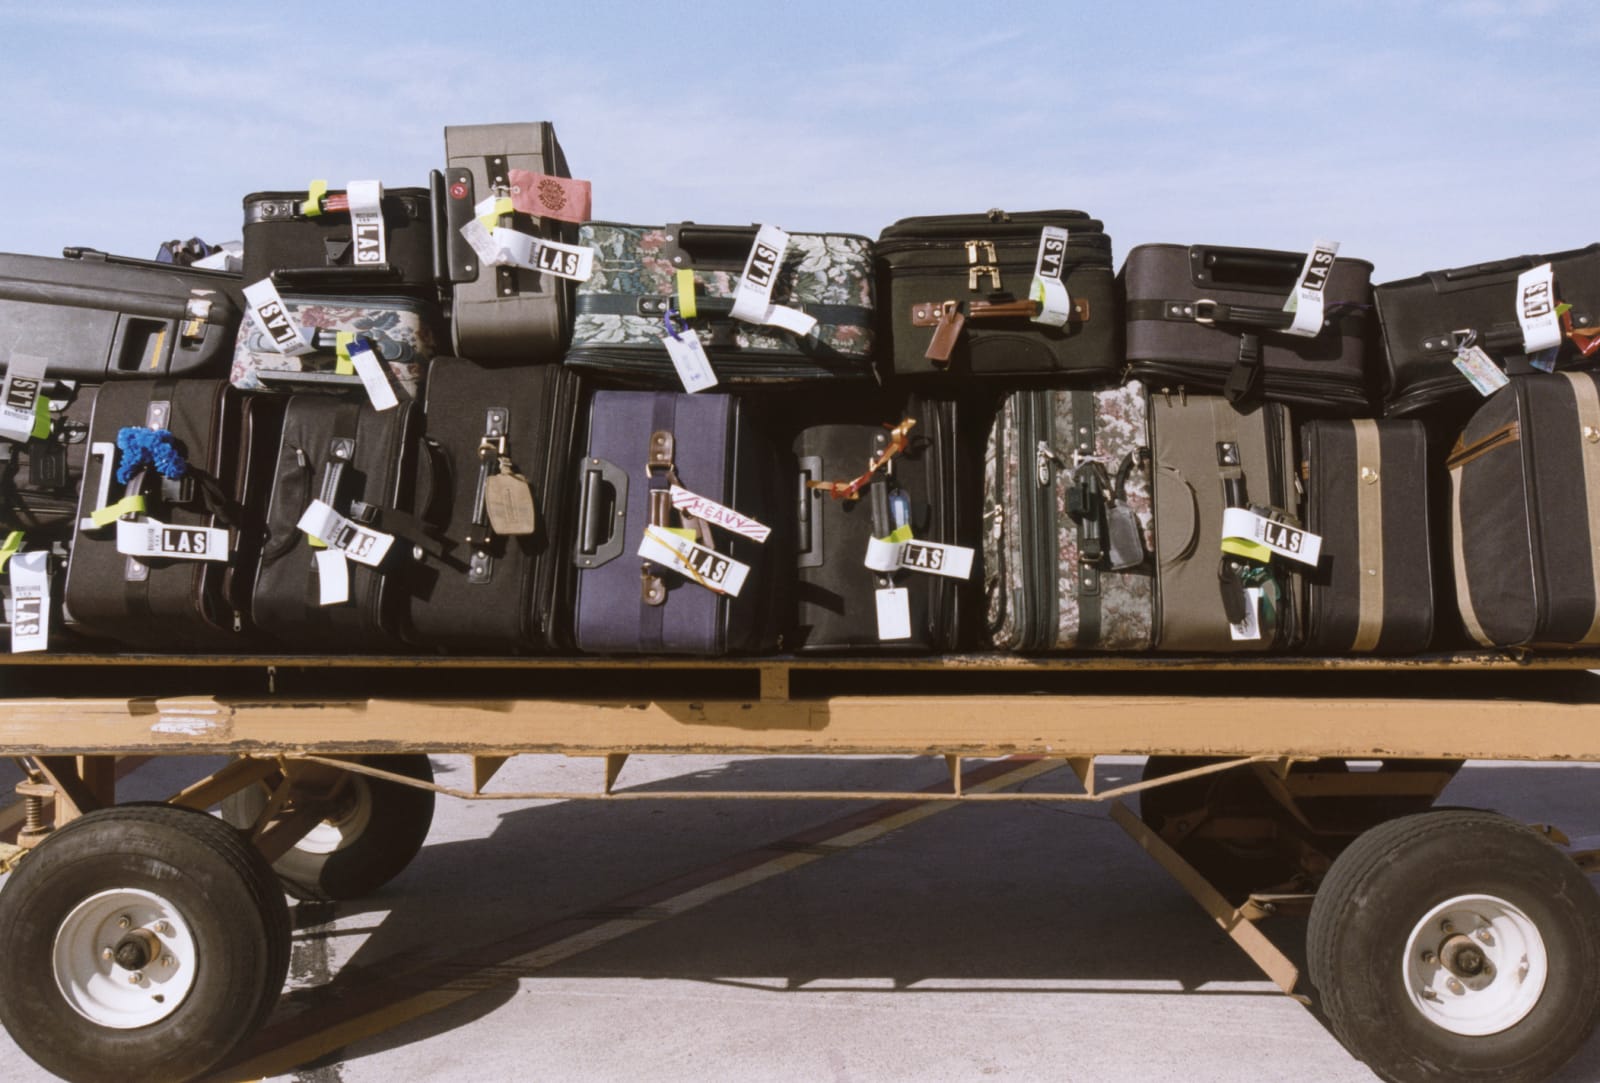 Luggage on the back of a truck